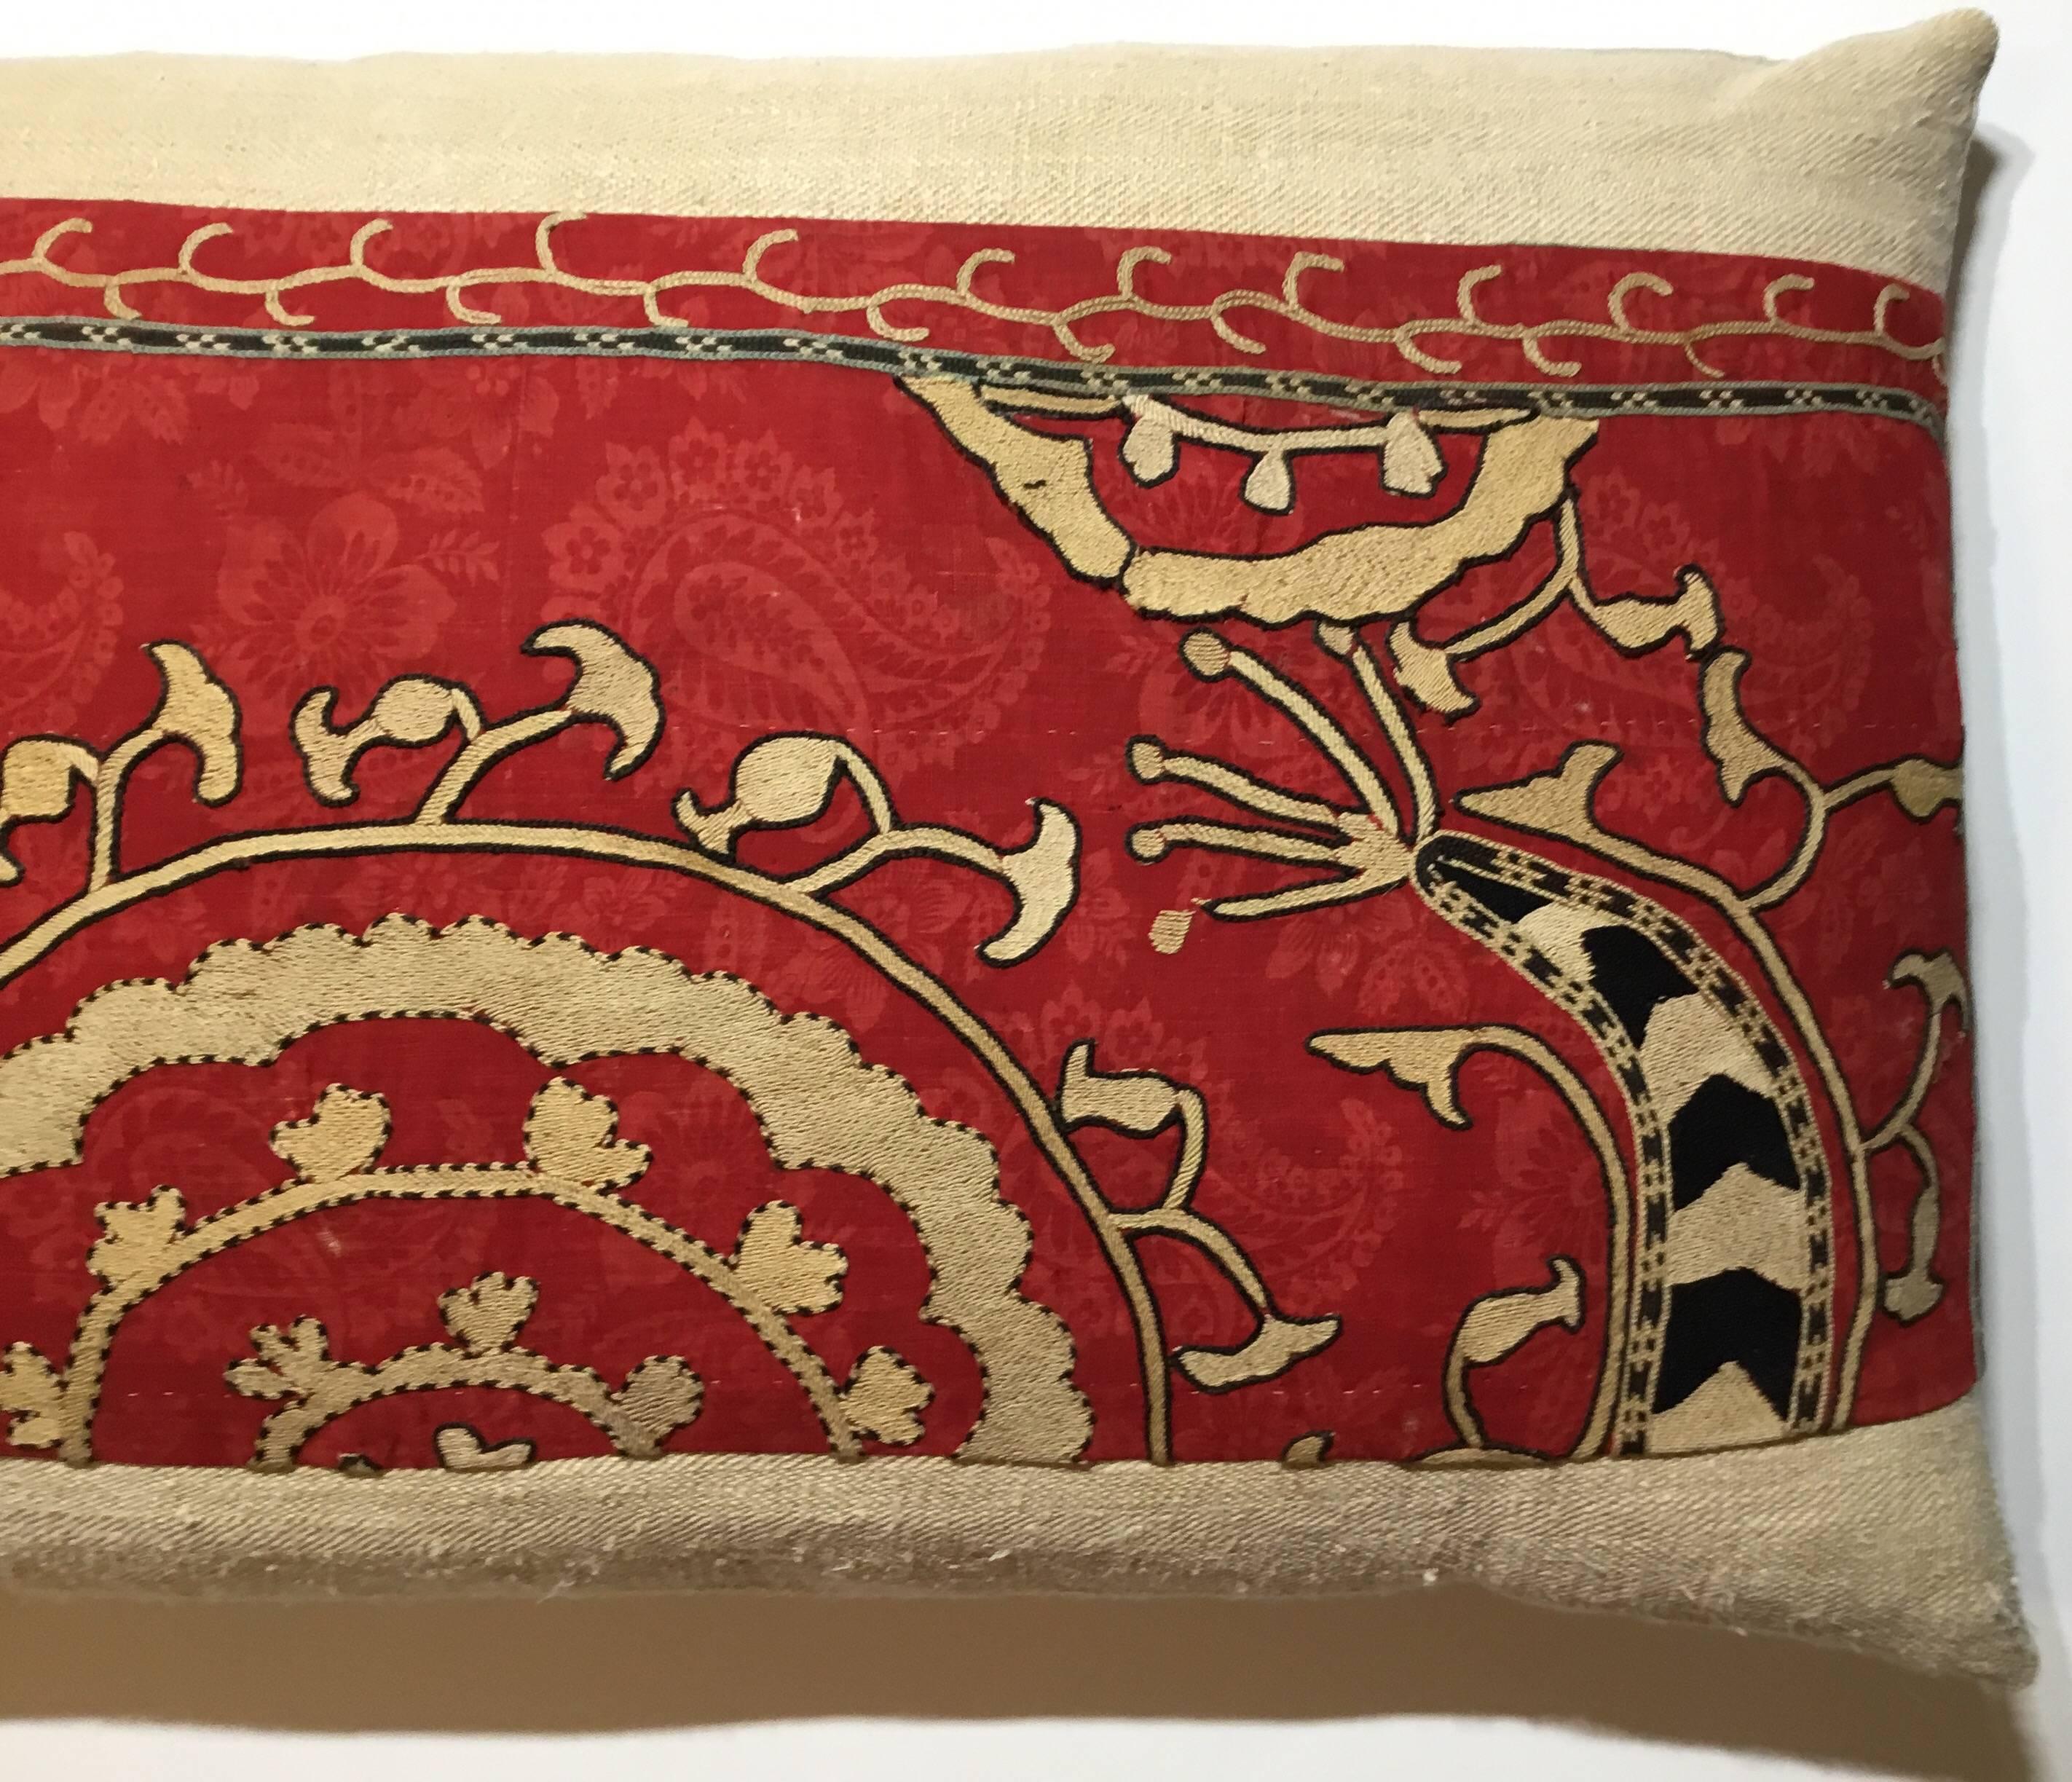 Beautiful pillow made of 19th century antique hand embroidery Suzani fragment,
very interact embroidery on 19th century red background print cotton.
Frash insert, down and feather.
Sides and back linen.